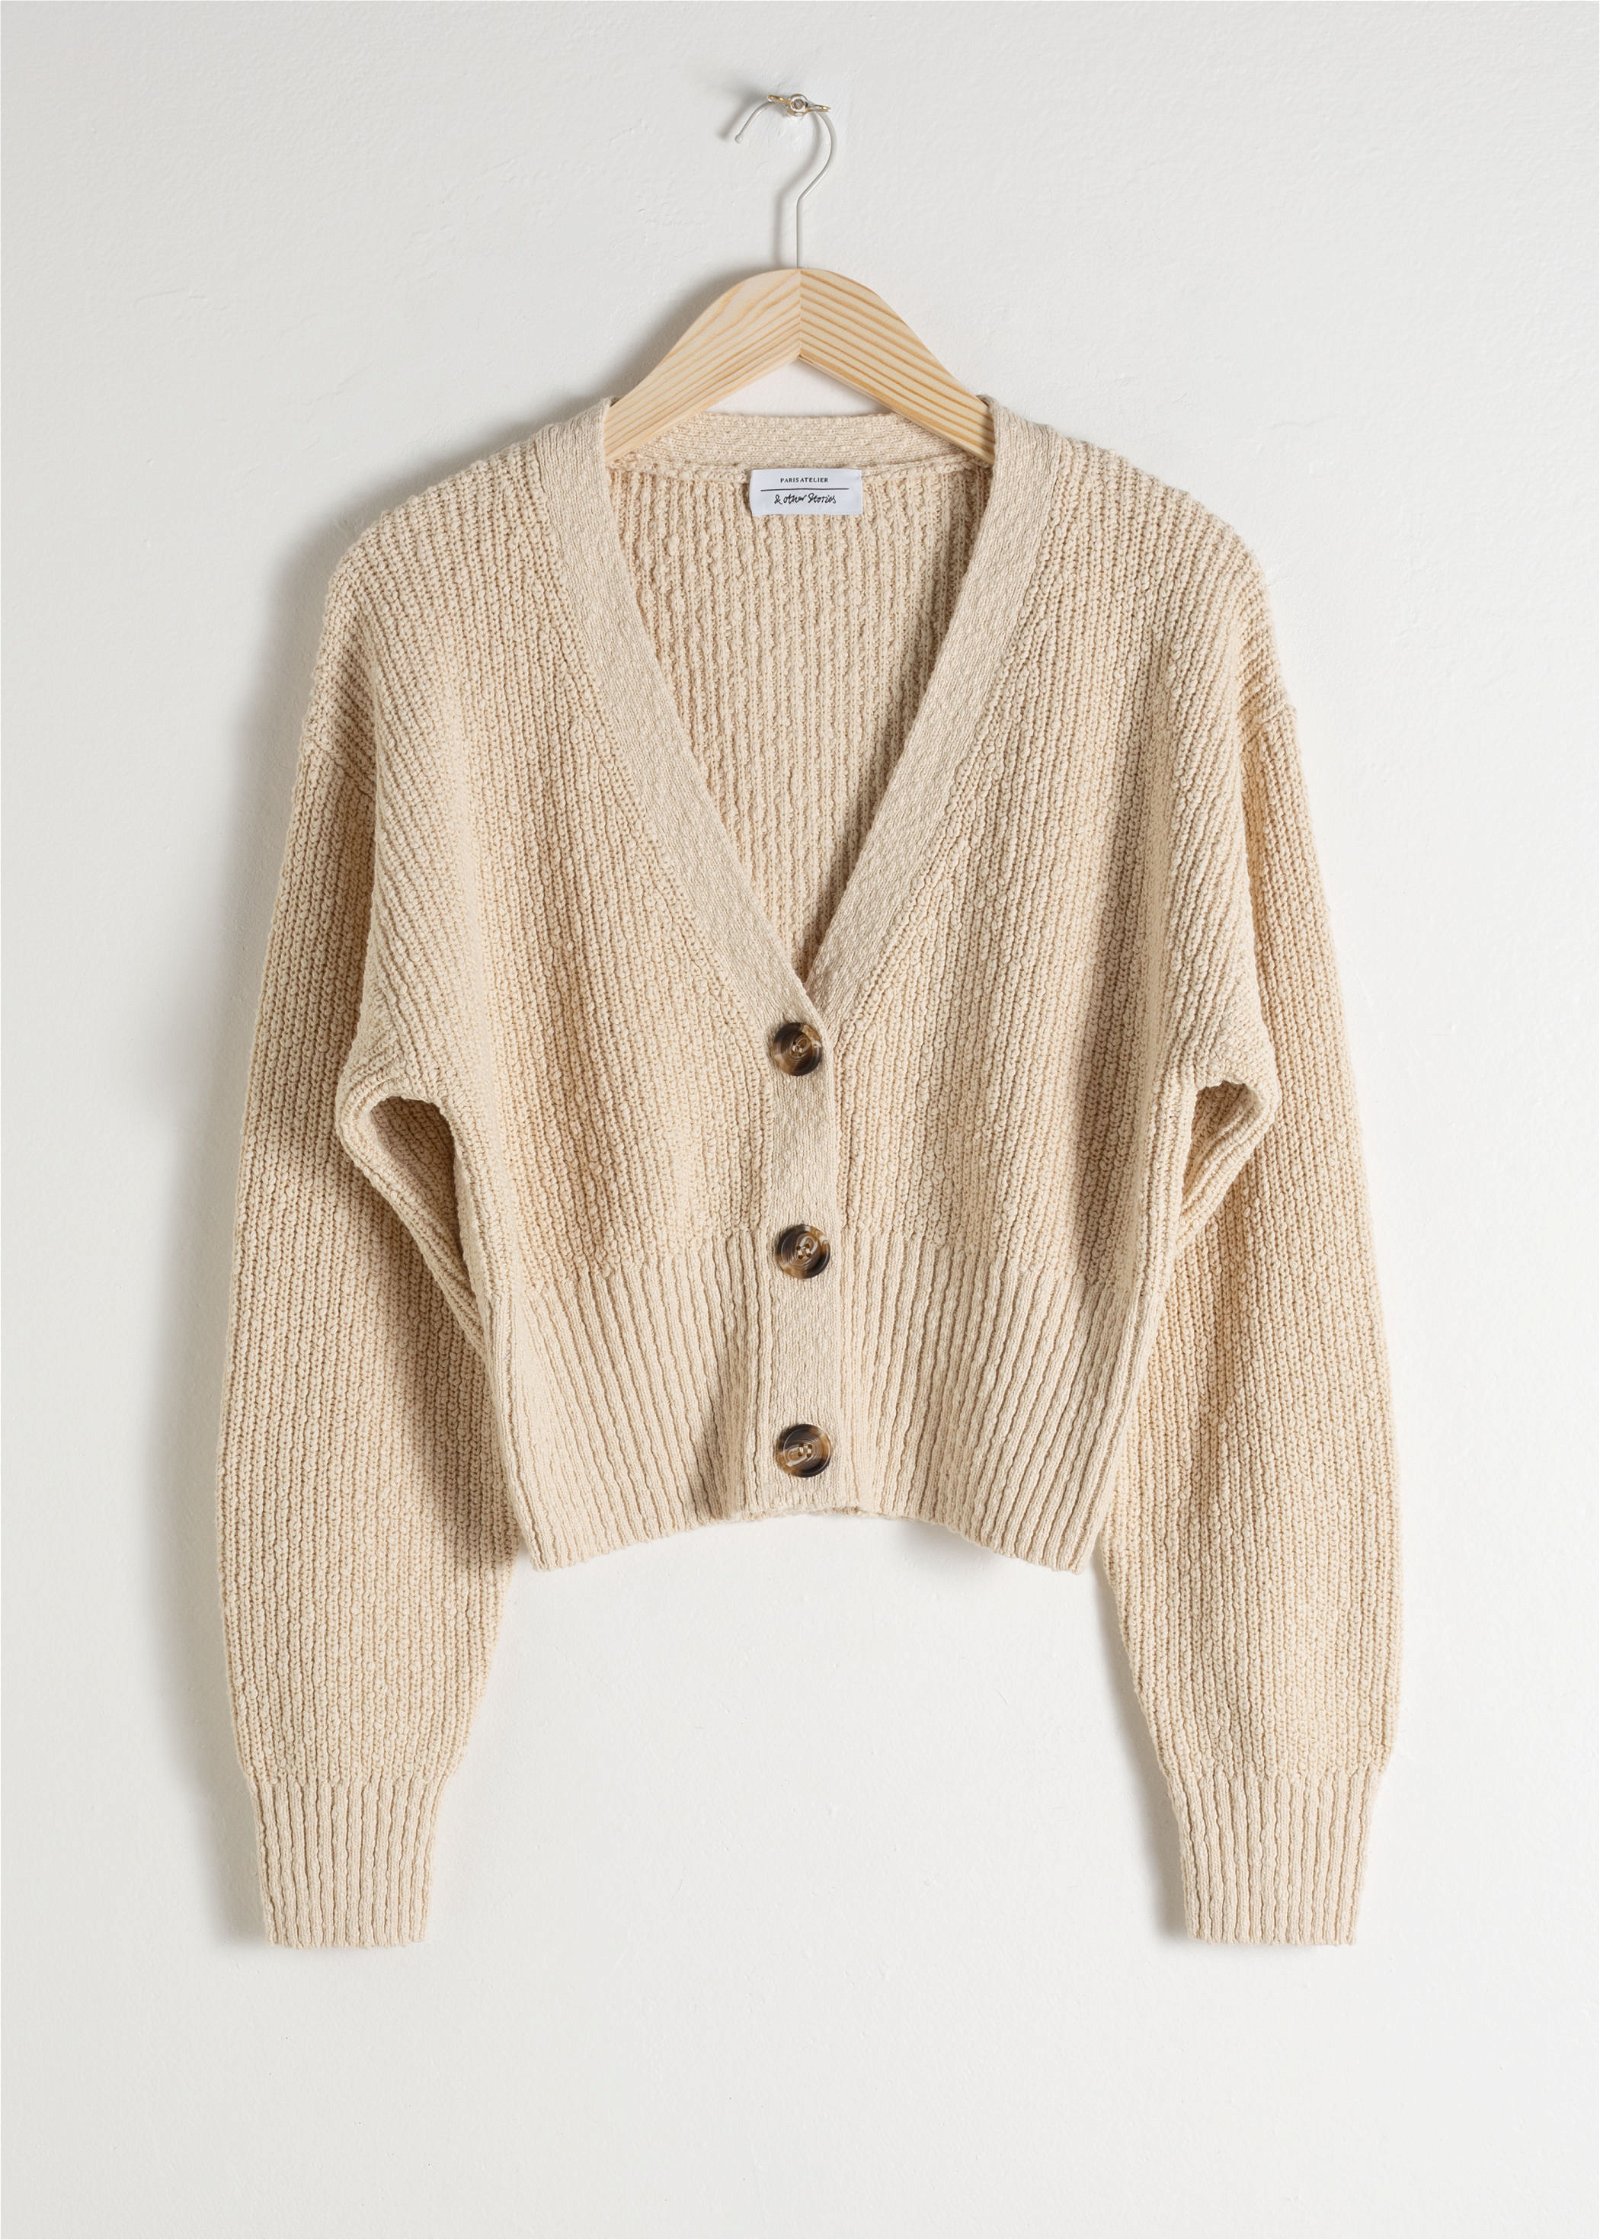 & OTHER STORIES Cropped Textured Cotton Cardigan | Endource